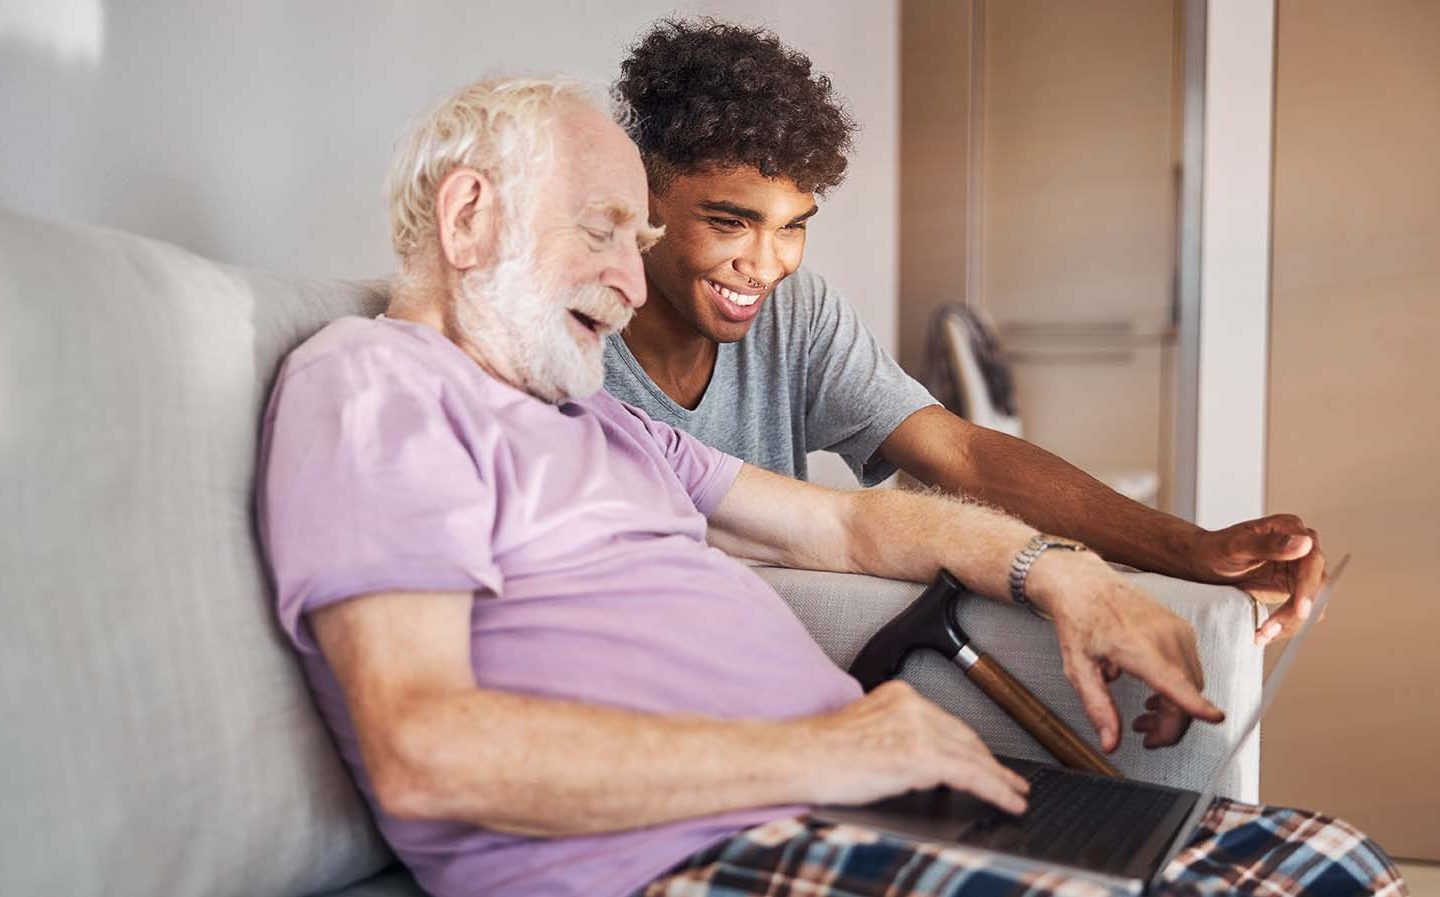 Older person sitting on sofa using laptop and walking stick by their side. Careworker looking at the same laptop, both smiling.